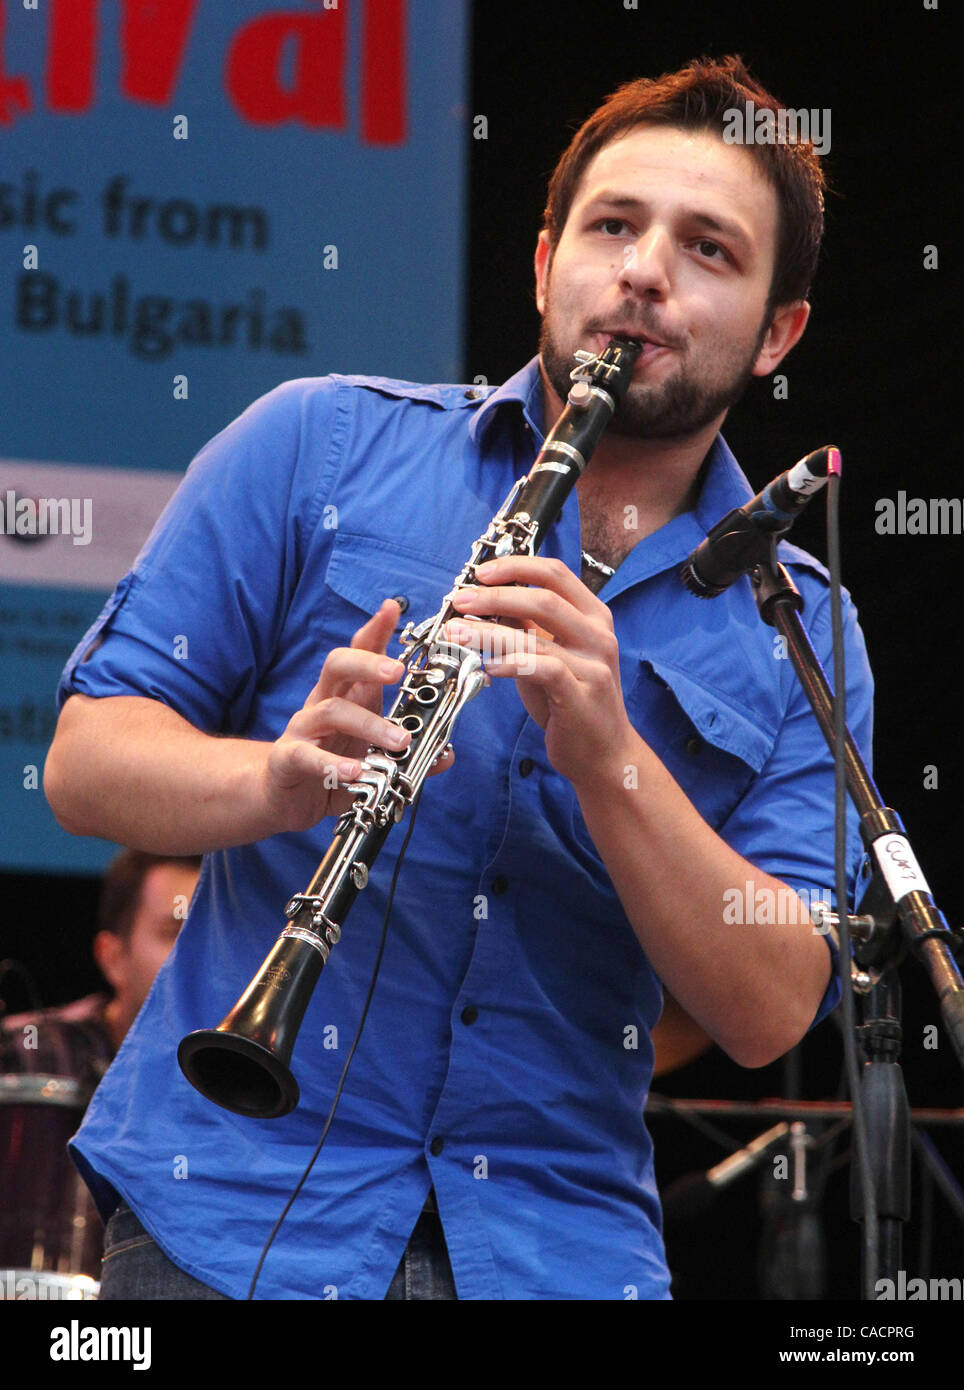 Sept. 26, 2010 - New York, New York, U.S. - Clarinetist ISMAIL LUMANOVSKI from the 'New York Gypsy All-Stars' performs during the New York Gypsy Festival as part of the Black Sea Roma Festival-a celebration of Gypsy music from Romania, Turkey, Ukraine and Bulgaria held at Summer Stage in Central Par Stock Photo